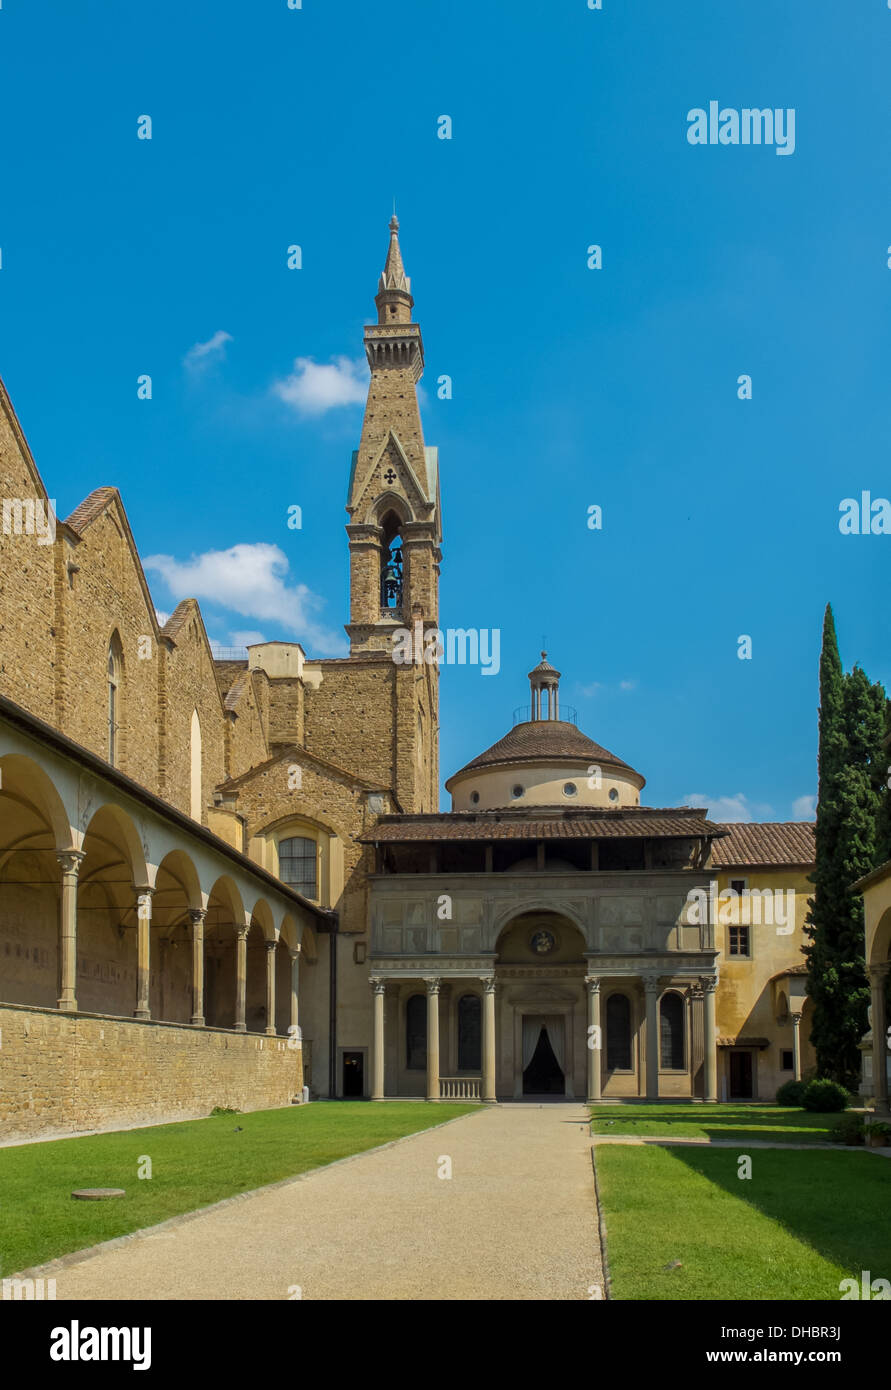 Courtyard of Basilica di Santa Croce. Cappella Pazzi entry in background. Florence, Italy Stock Photo